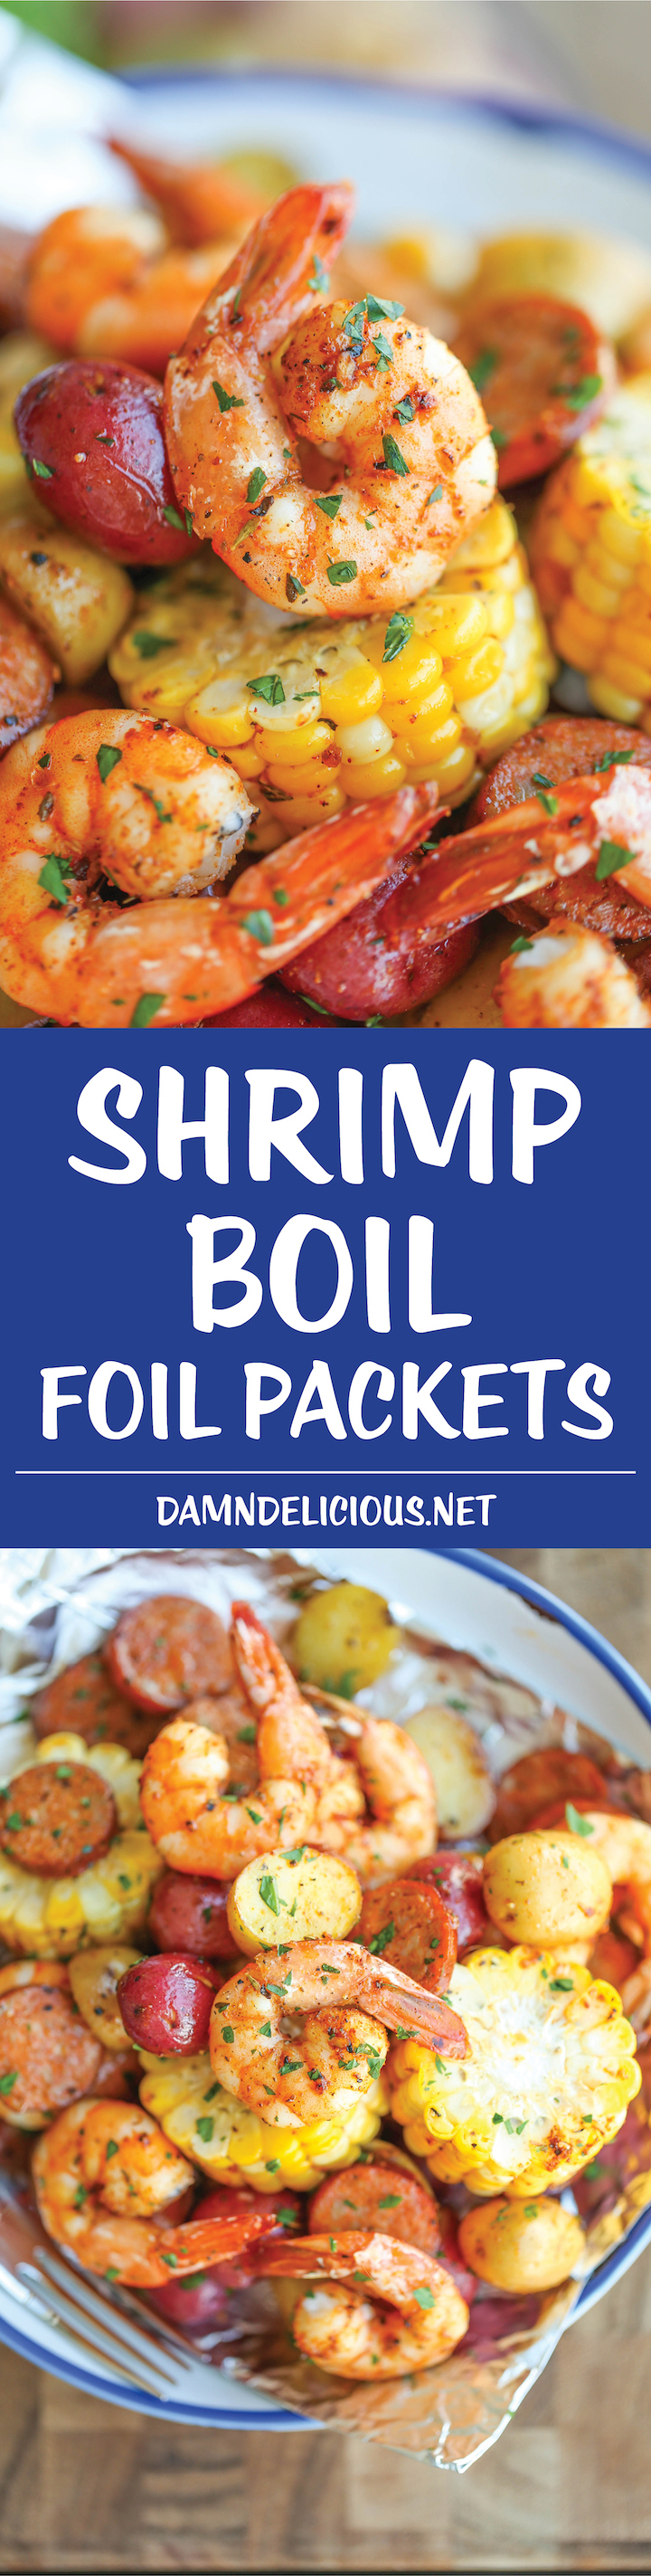 Shrimp Boil Foil Packets - Easy, make-ahead foil packets packed with shrimp, sausage, corn and potatoes. It's a full meal with zero clean-up!